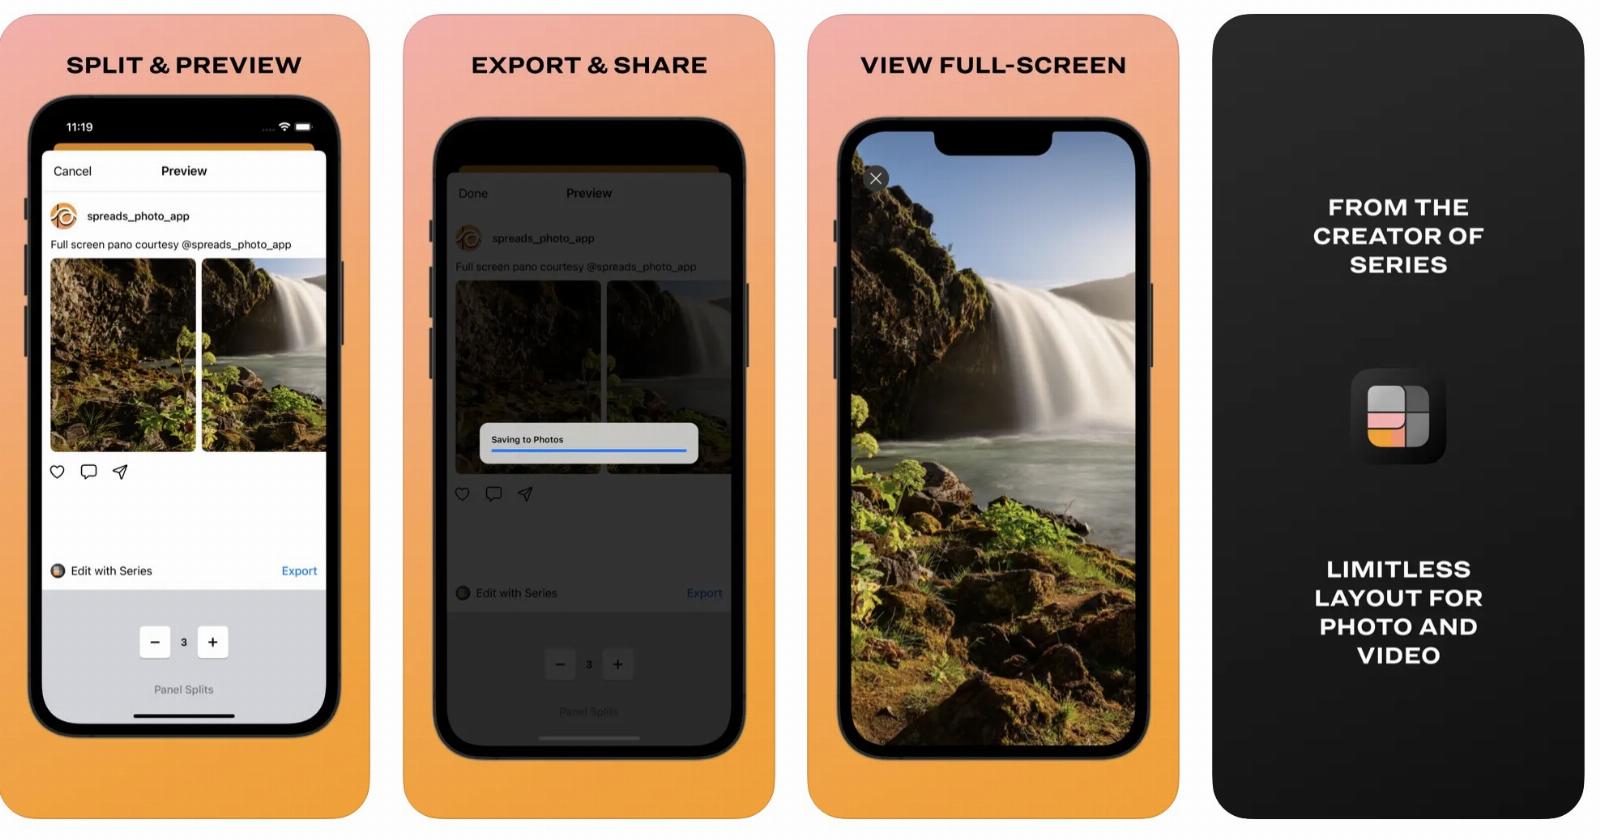 Spreads lets you share full screen panoramic photos to Instagram Threads